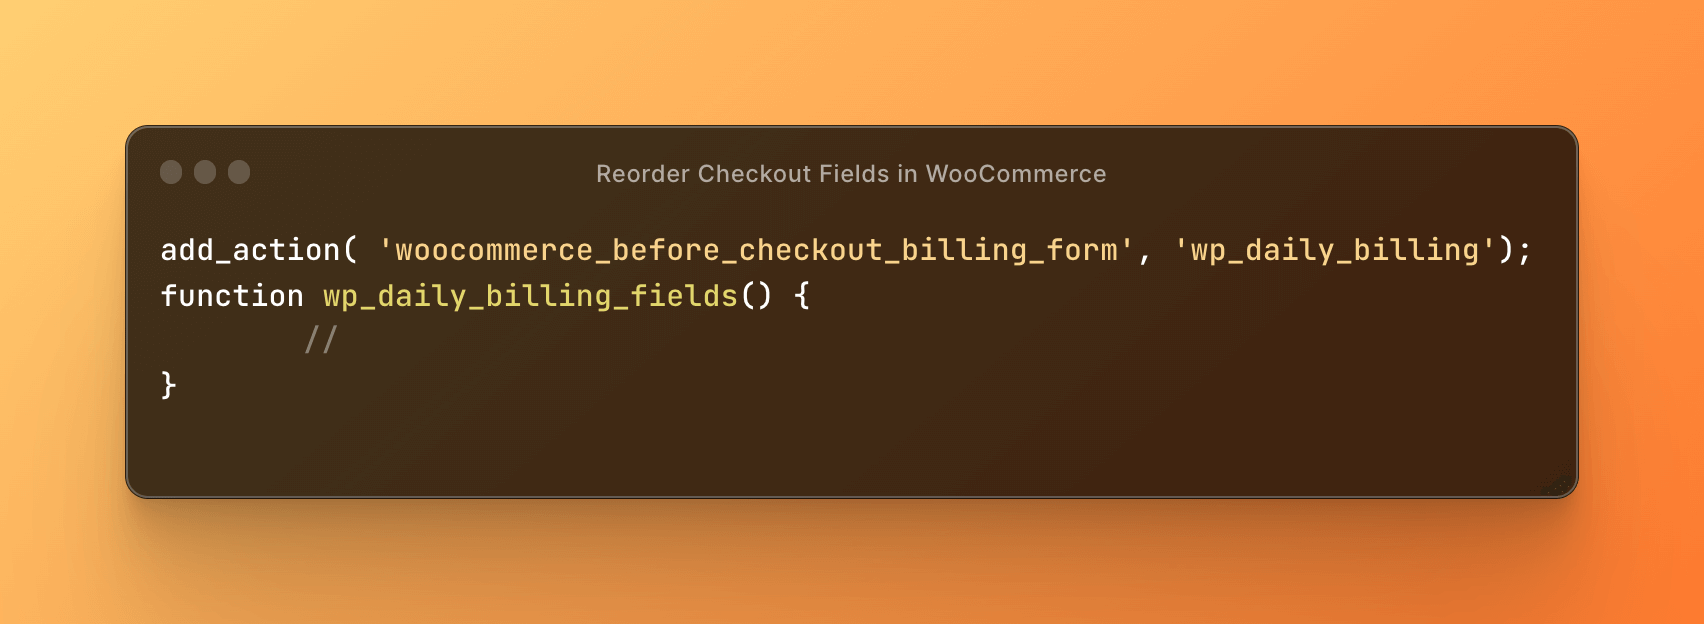 How to Reorder Checkout Fields in WooCommerce